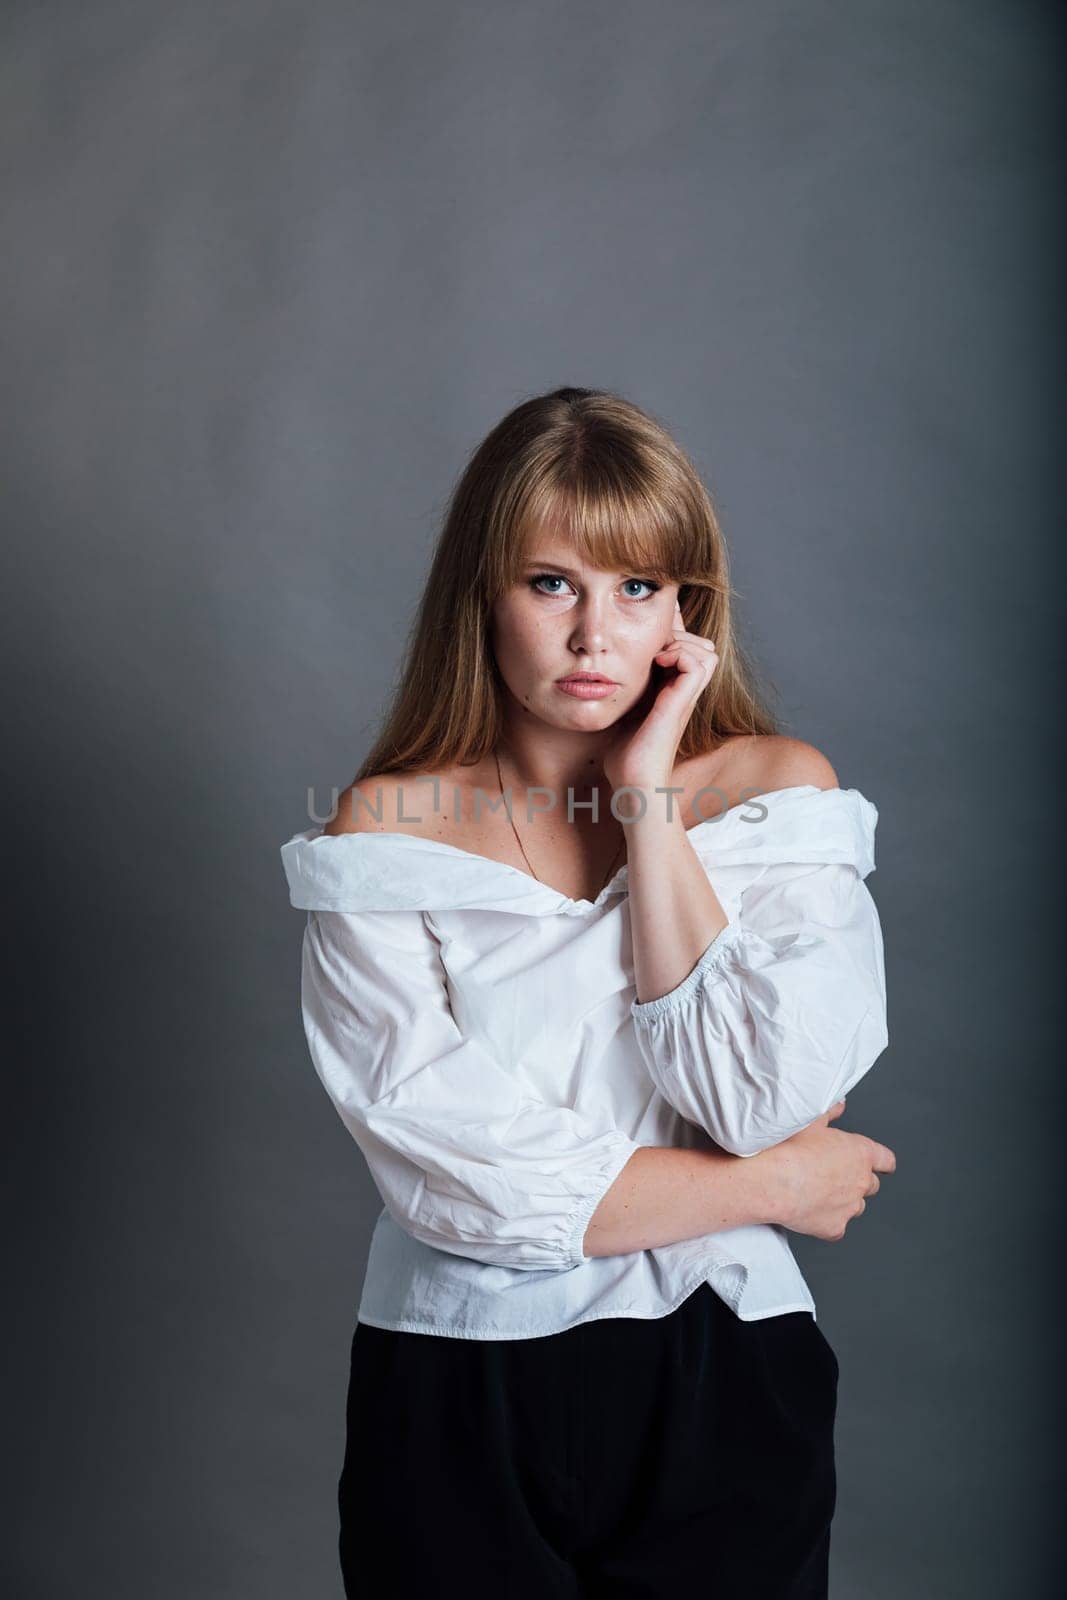 business fashion woman poses on a dark background by Simakov